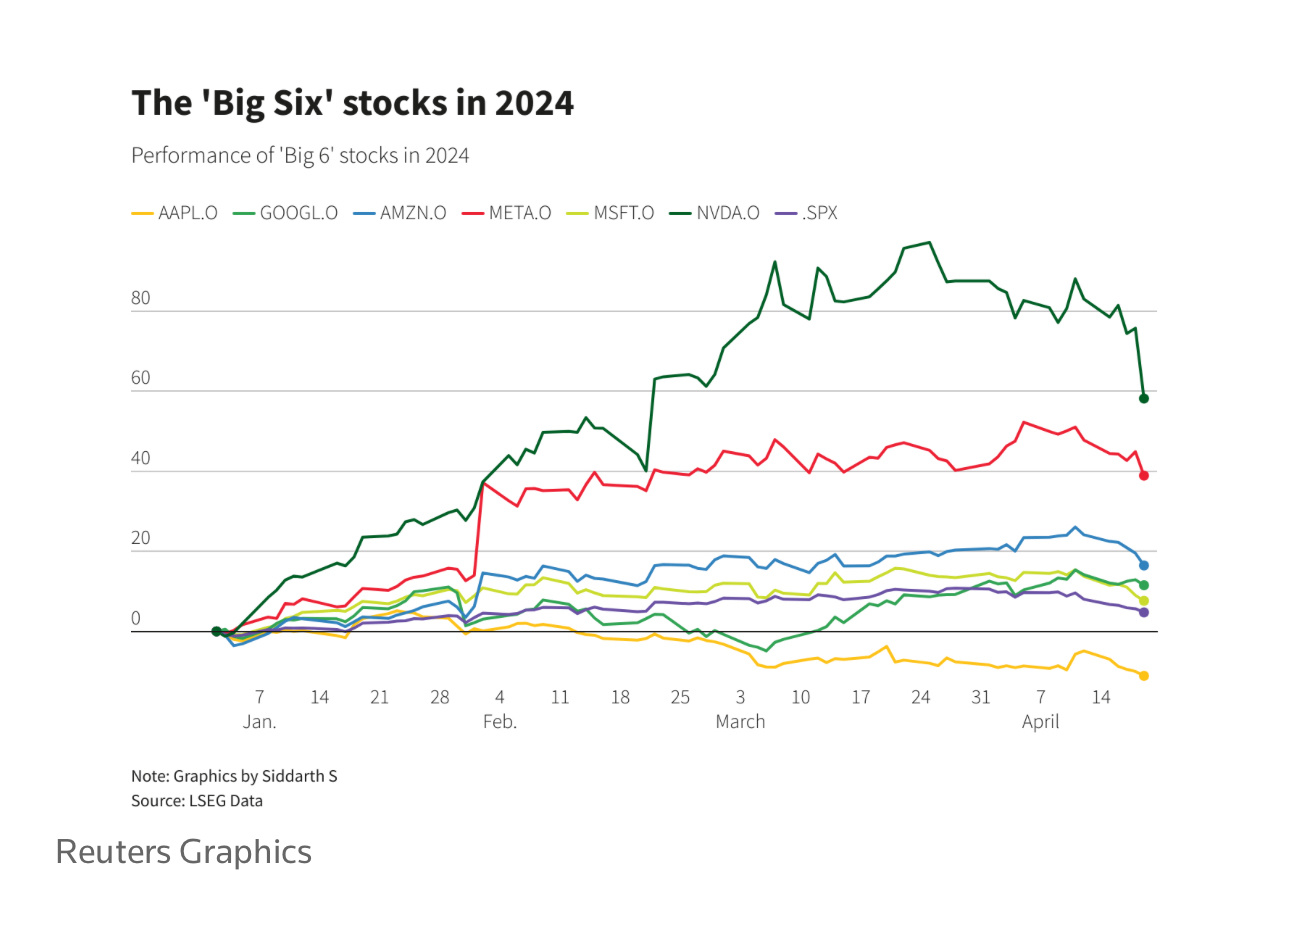 [Share Link: reuters.com/mar...] April 22 (Reuters) - Profit growth momentum of the so-called Big Six technology stocks could "collapse" over the next few quart...